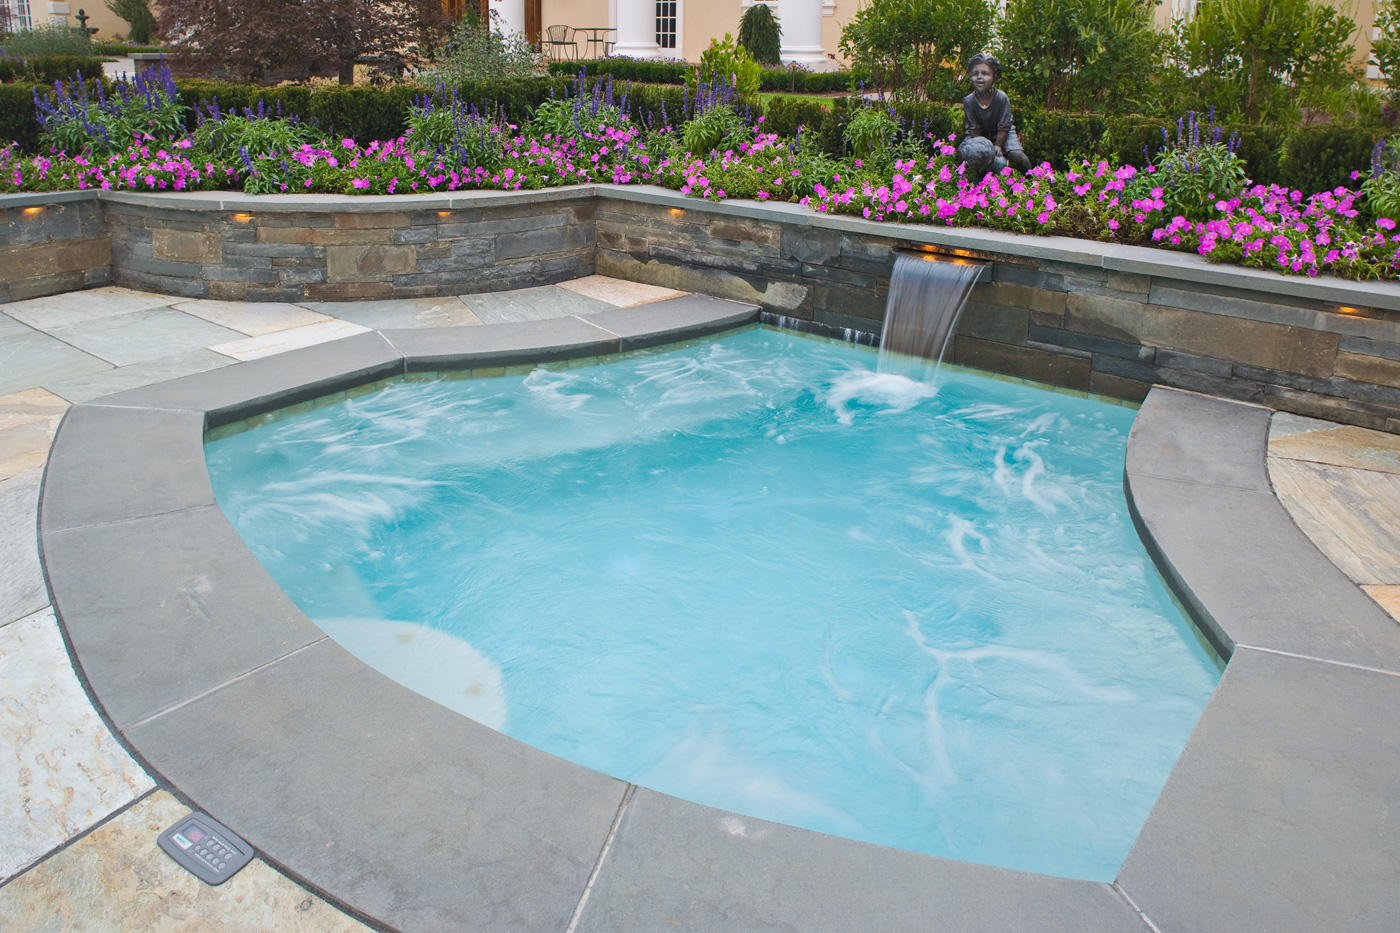 Spa and Pool Landscaping in NJ by Cording Landscape Design